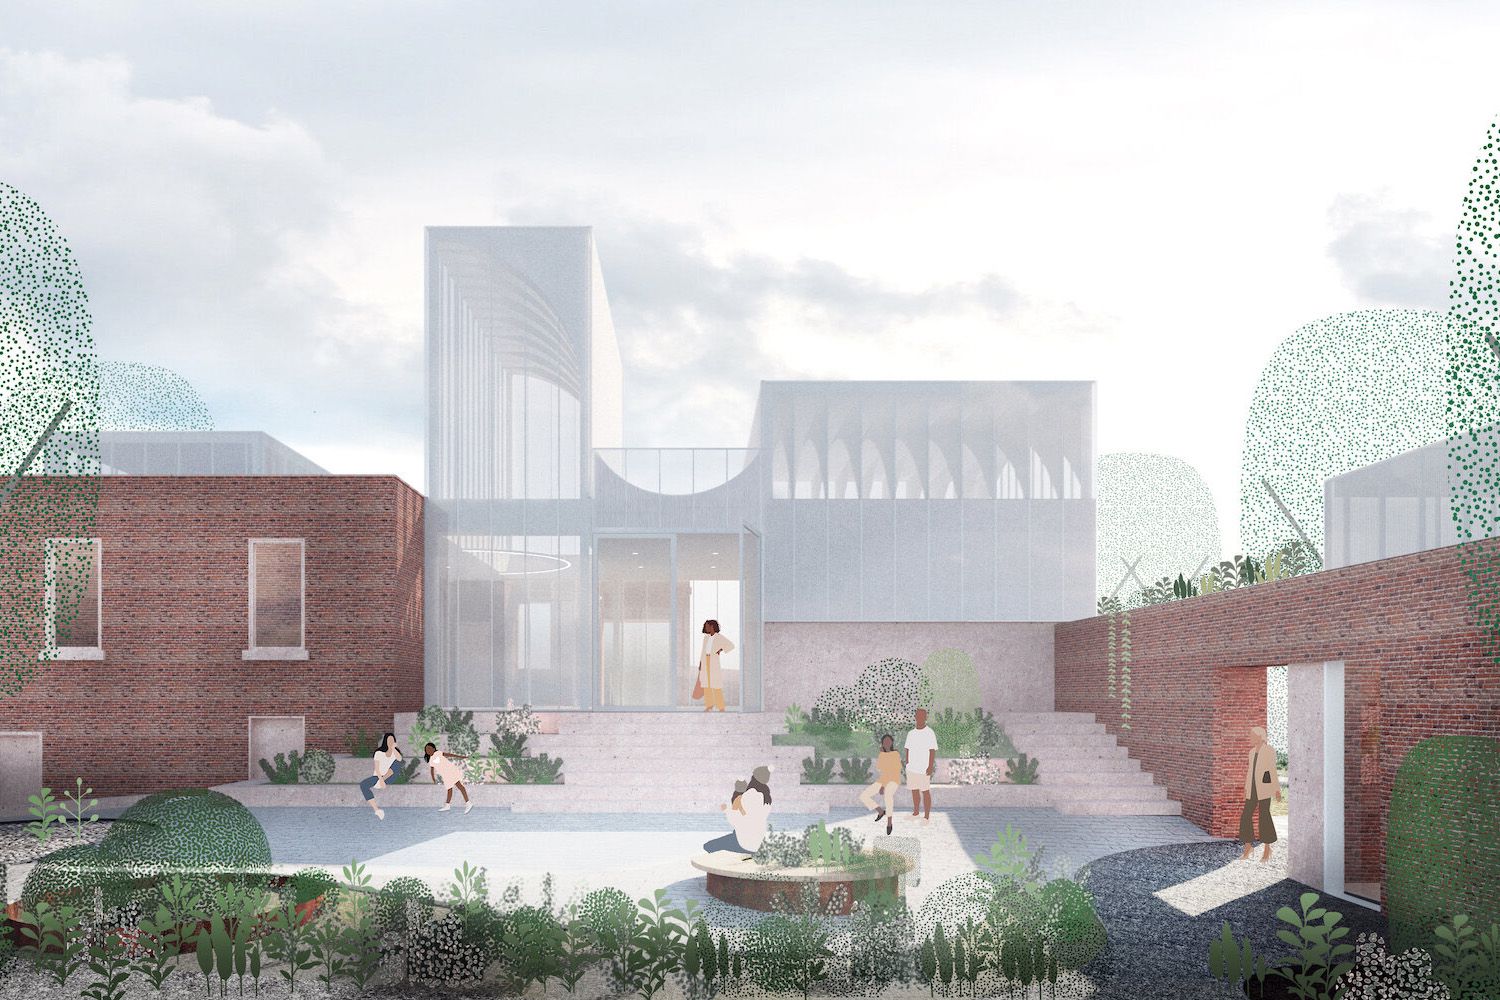 Lorcan O'Herlihy Architects to Transform Dilapidated Detroit Convent into Contemporary Art Center